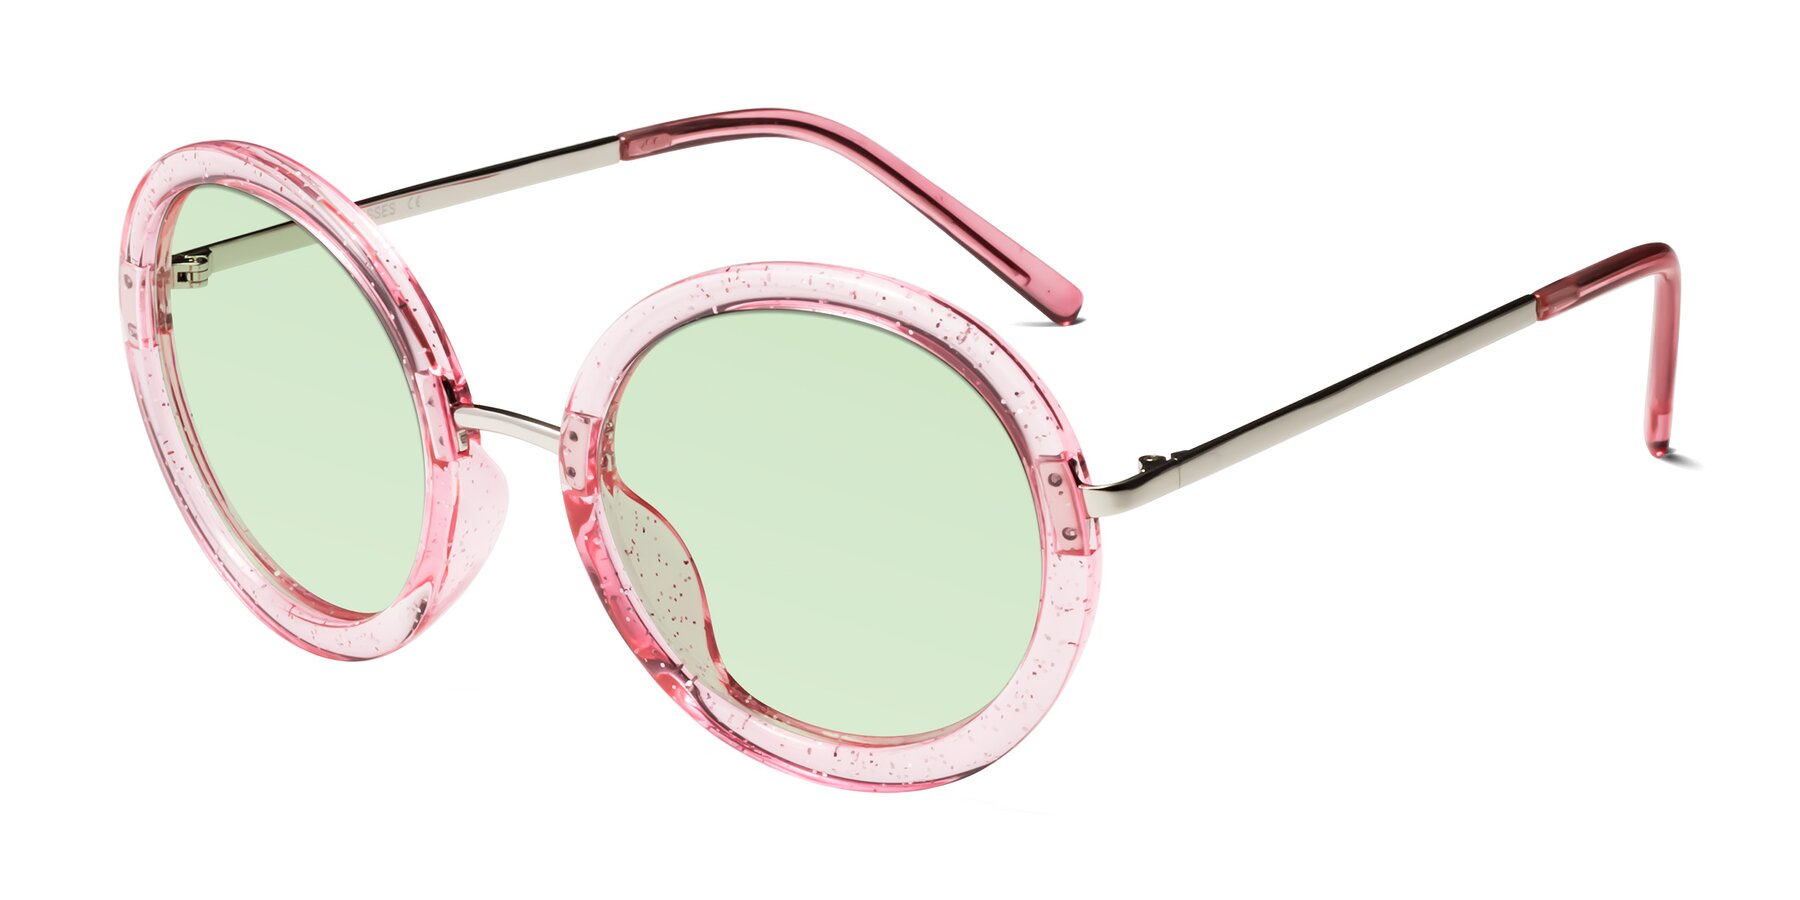 Angle of Bloom in Transparent Pearl Pink with Light Green Tinted Lenses